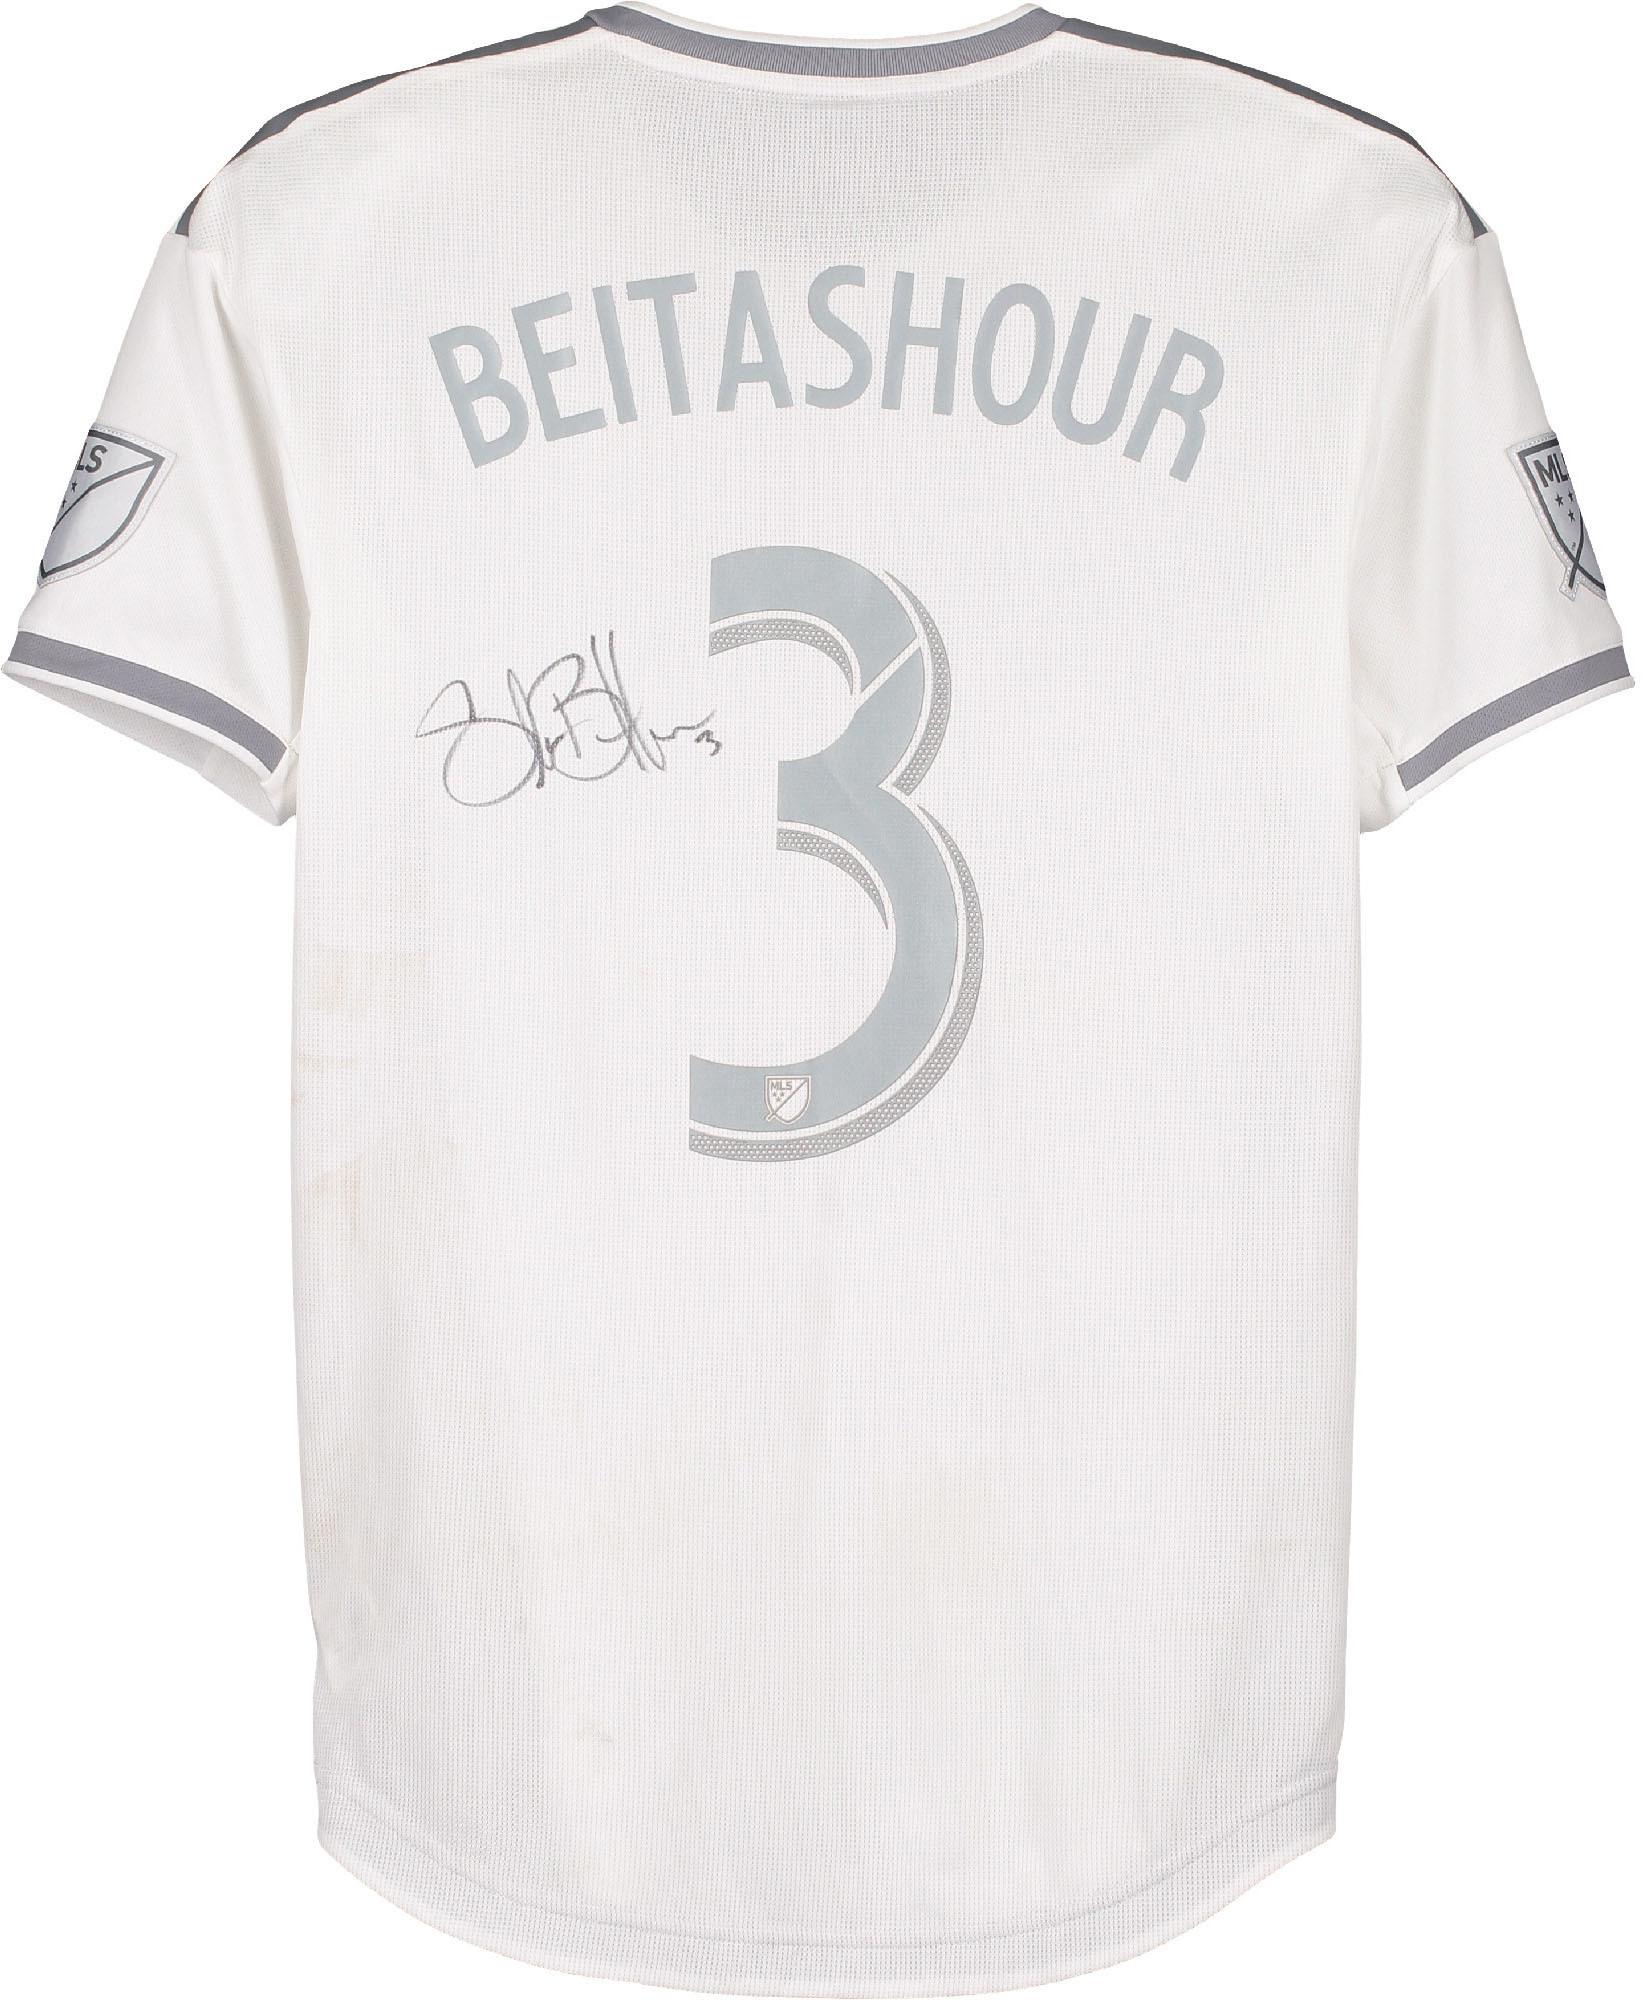 Steven Beitashour LAFC Autographed Match-Used #3 White Jersey from the 2019 MLS Season - Fanatics Authentic Certified